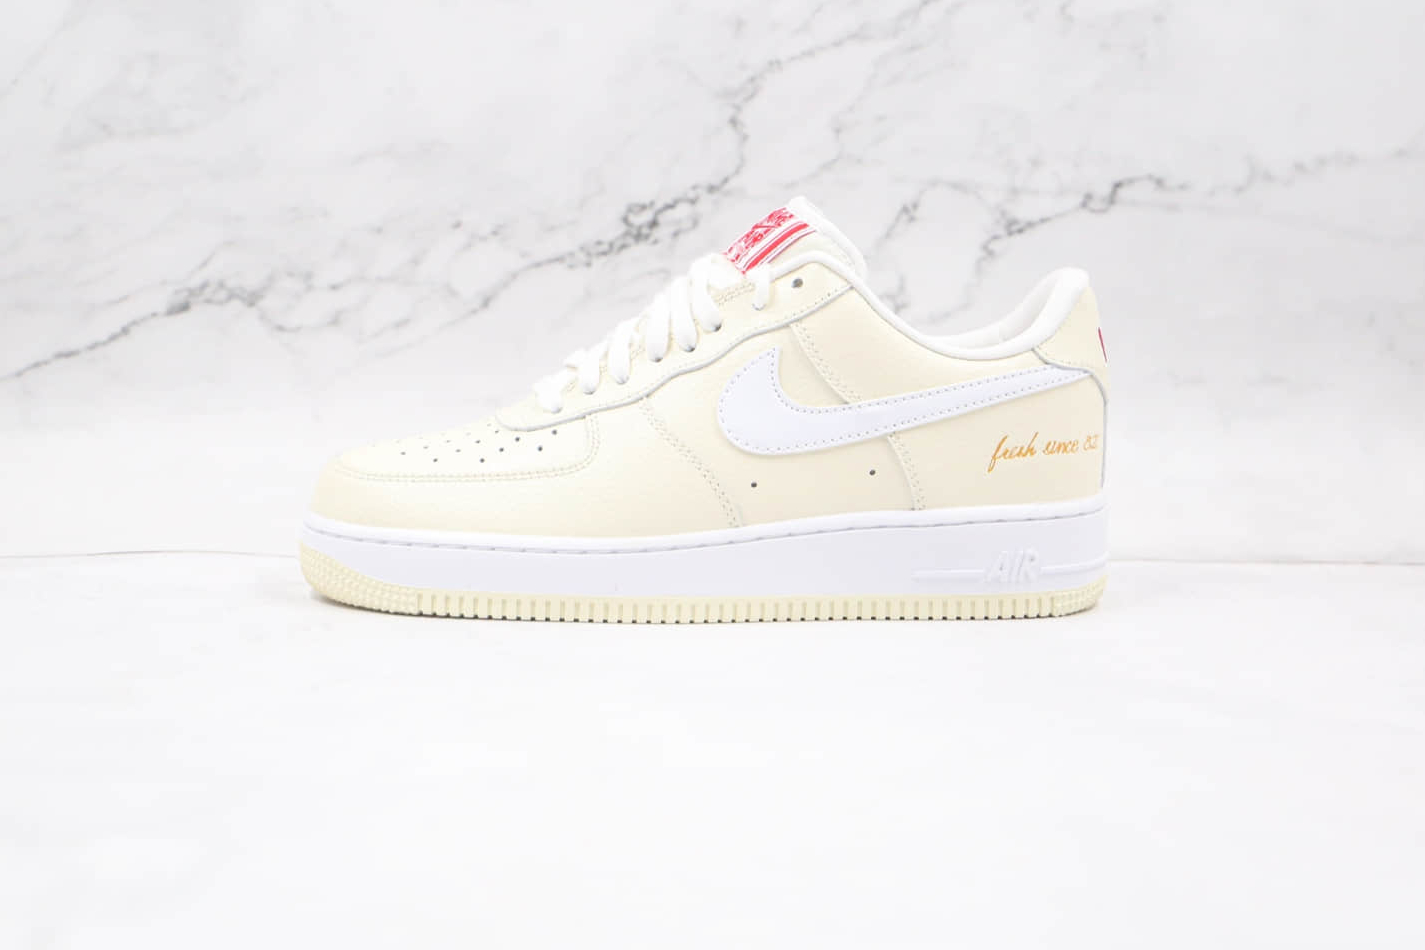 Nike Air Force 1 '07 Premium 'Popcorn' CW2919-100 - Exclusive Release